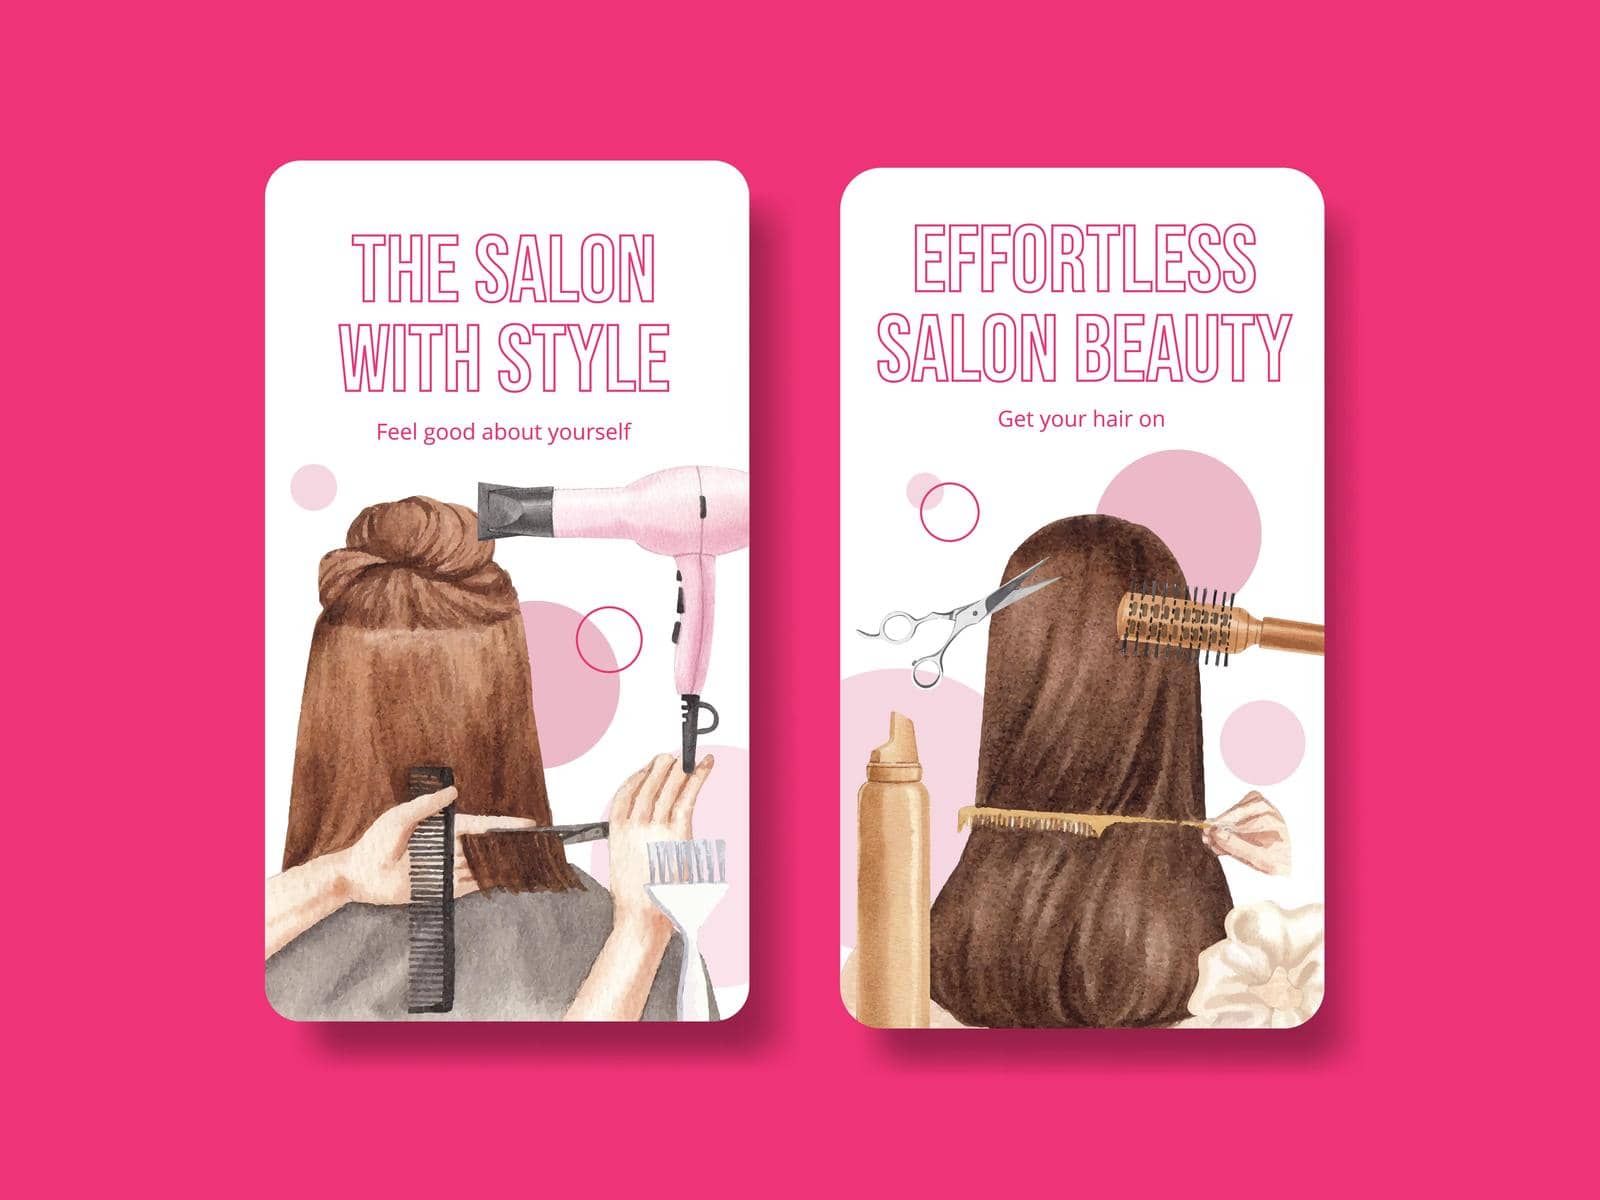 Instagram template with salon hair beauty concept,watercolor style by Photographeeasia